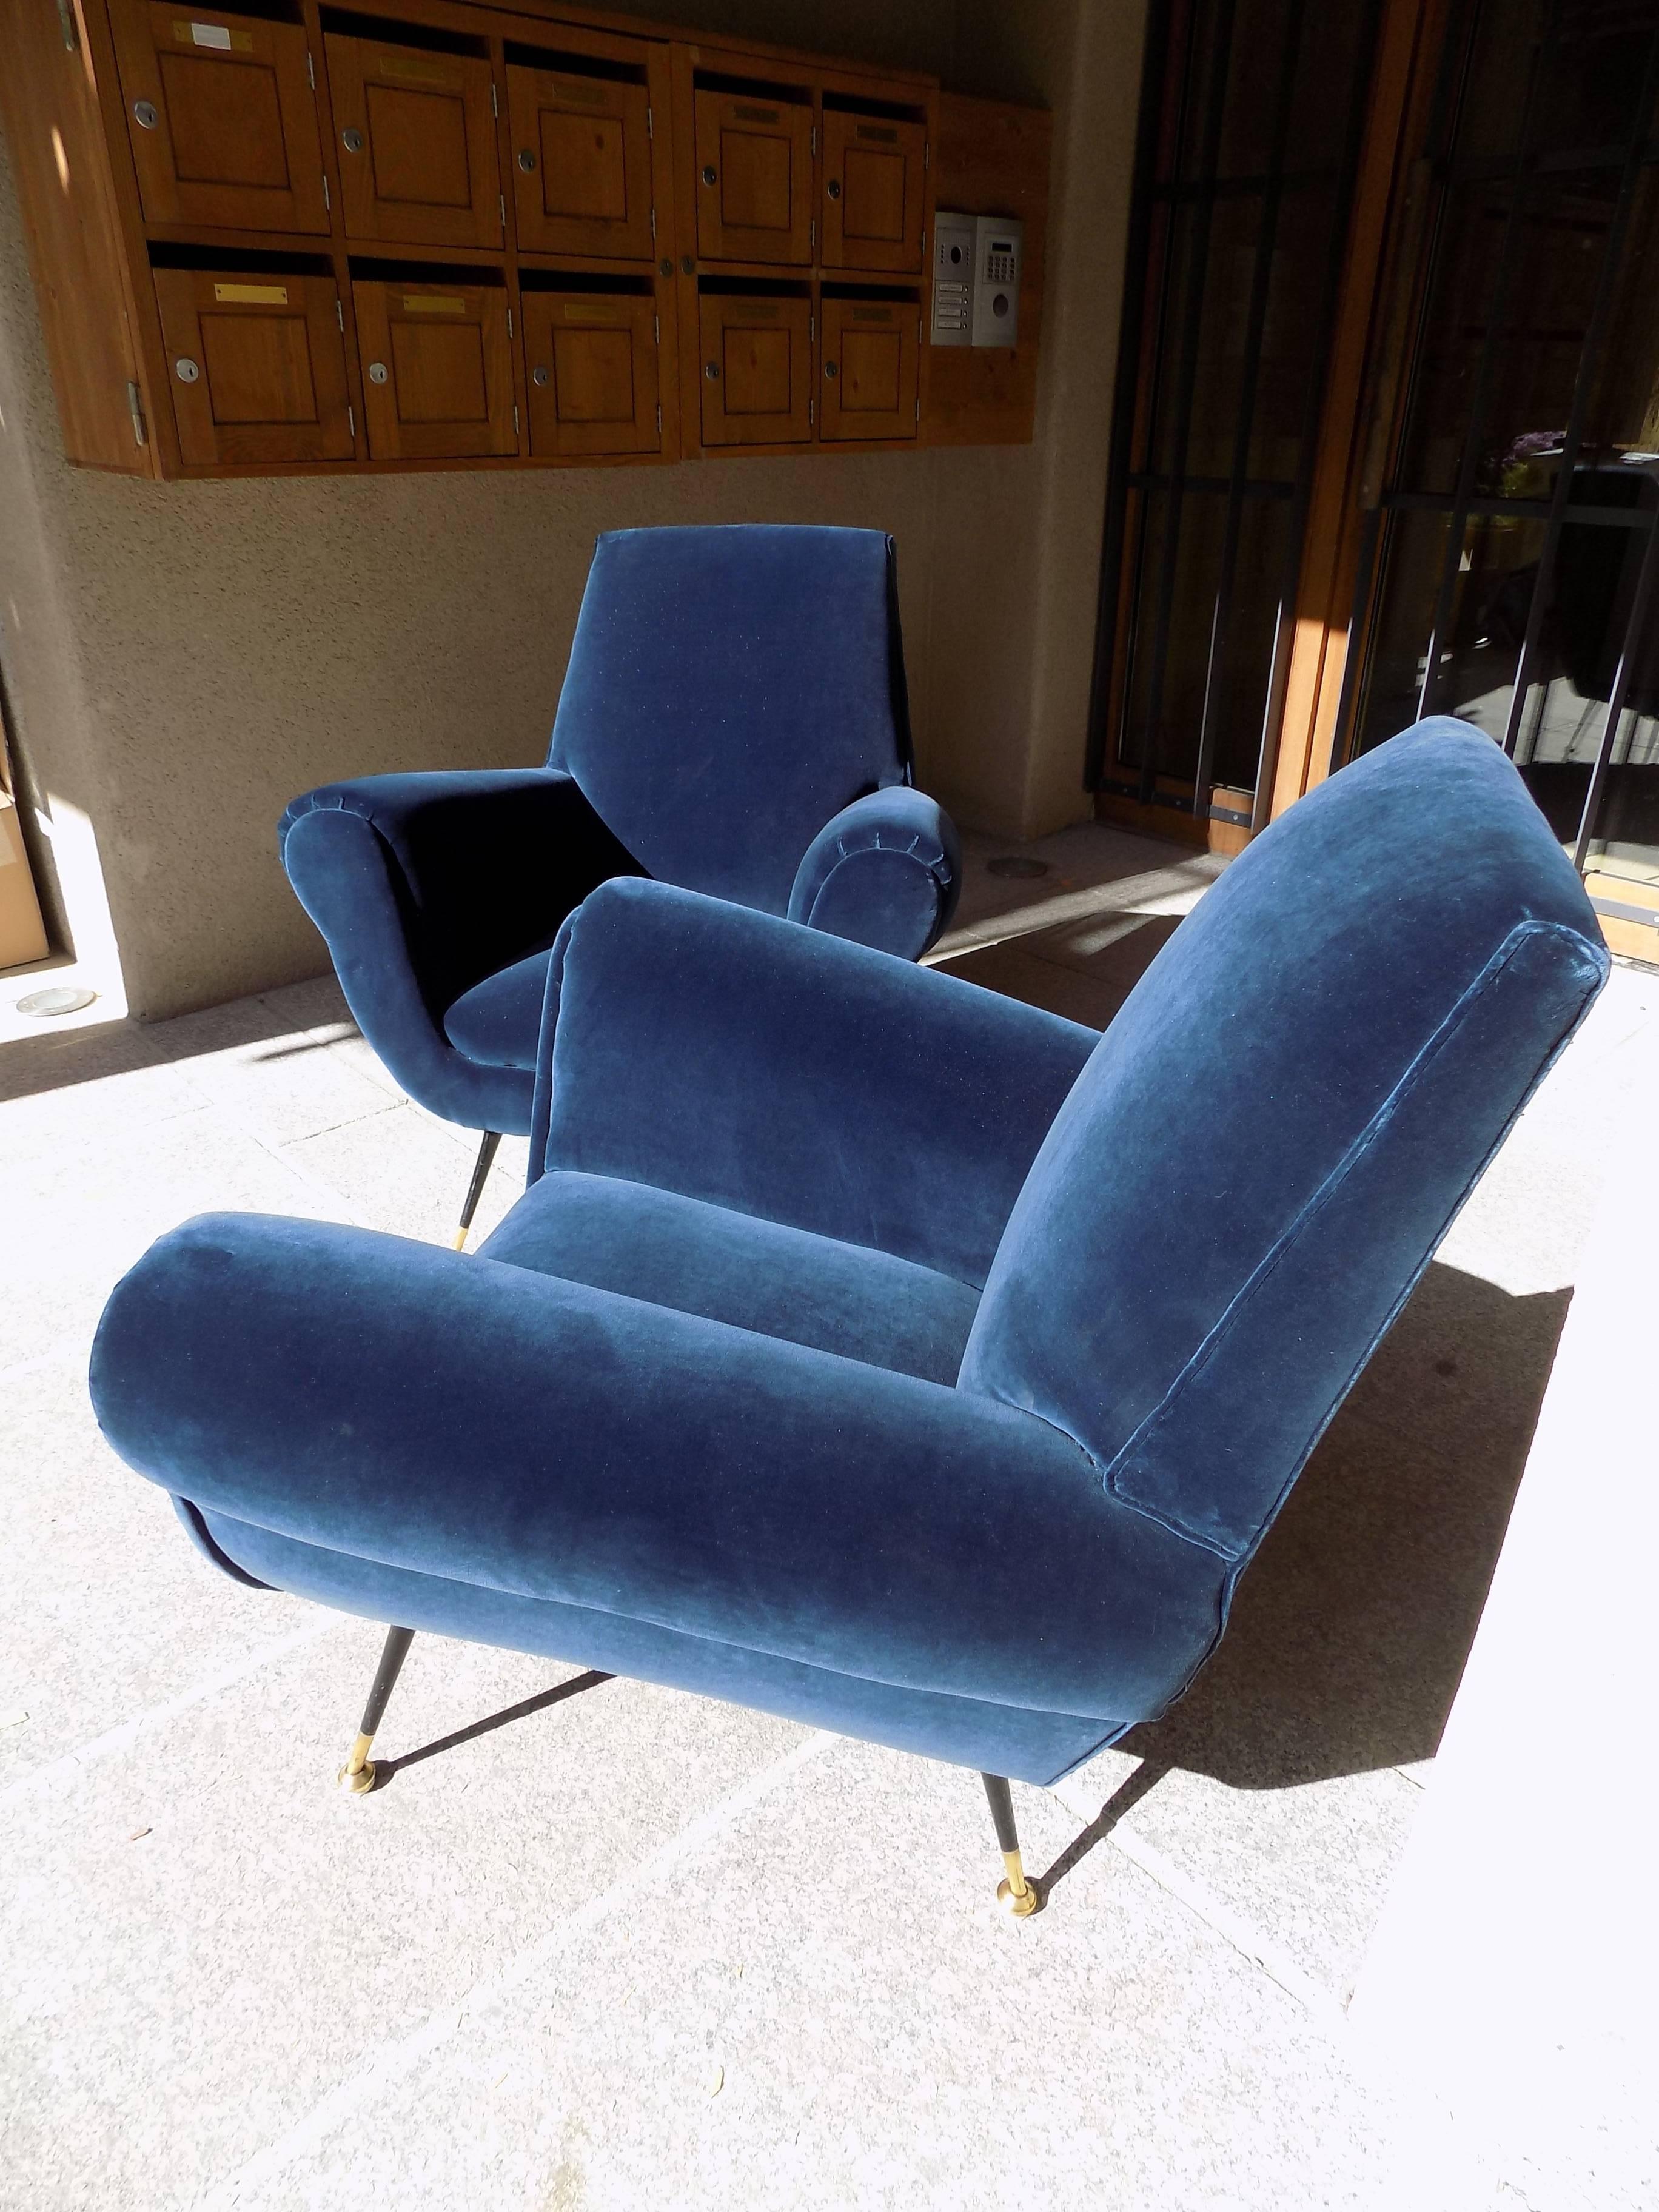 Pair of 1960 armchairs in perfect condition.